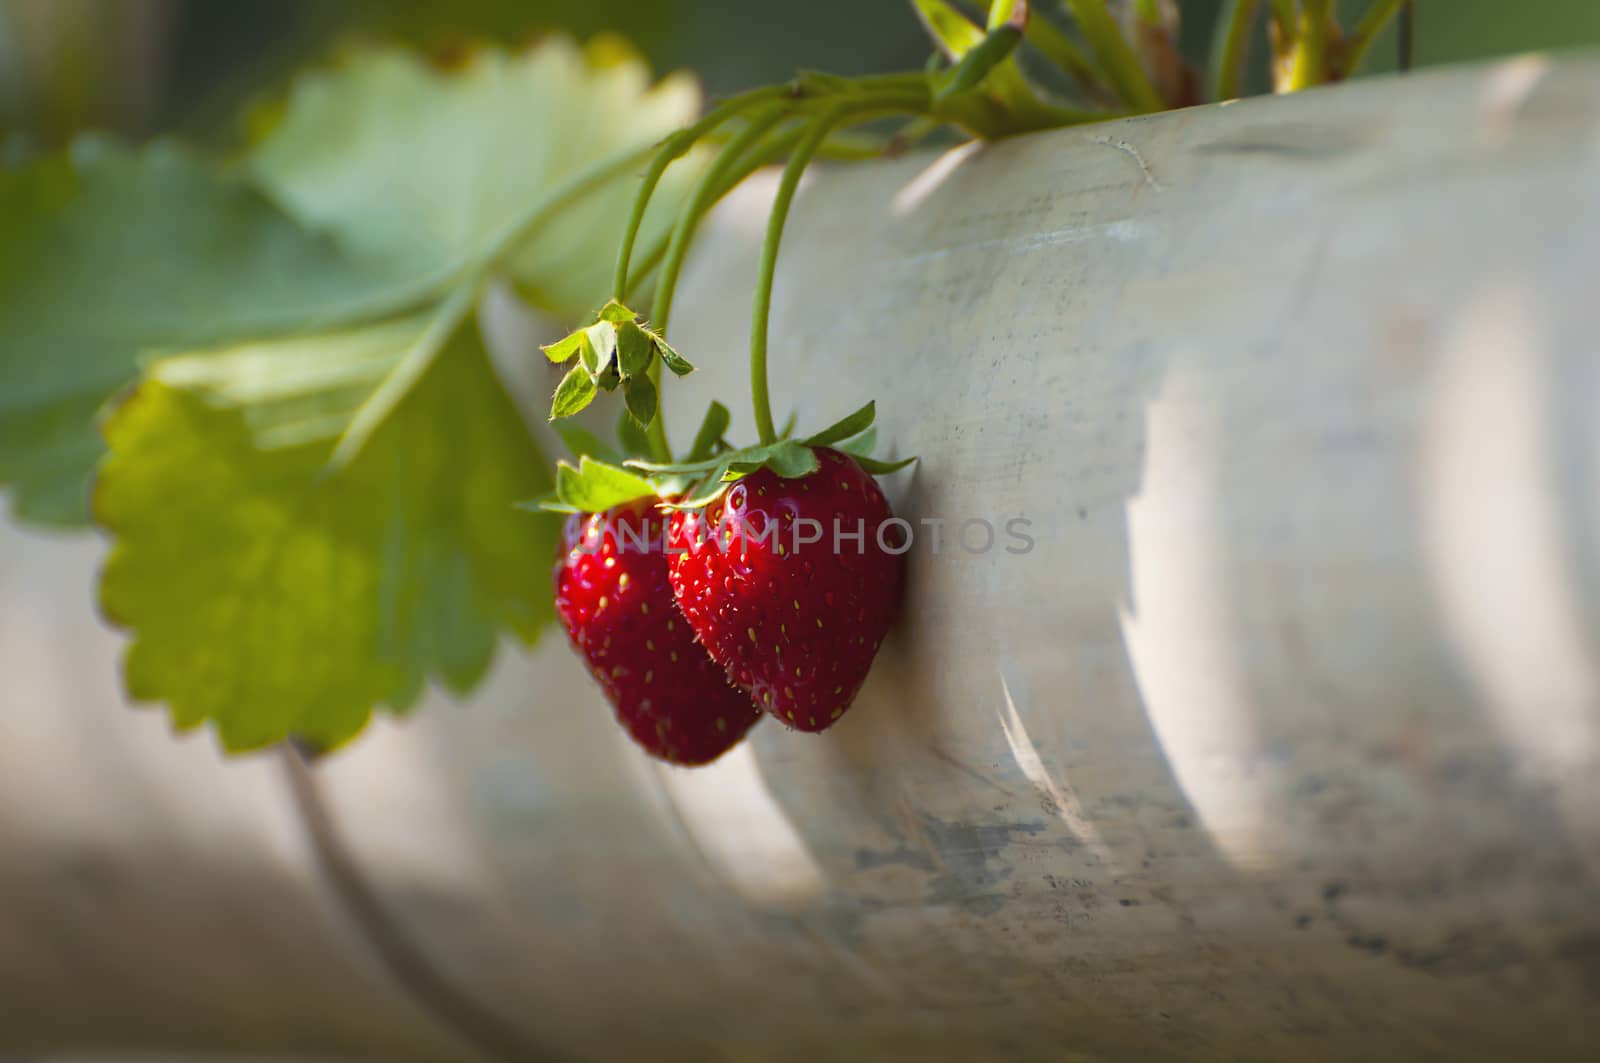 Fresh colorful red ripe strawberry with green leaves growing in bamboo tray - fresh clean fruit background concept by pairhandmade